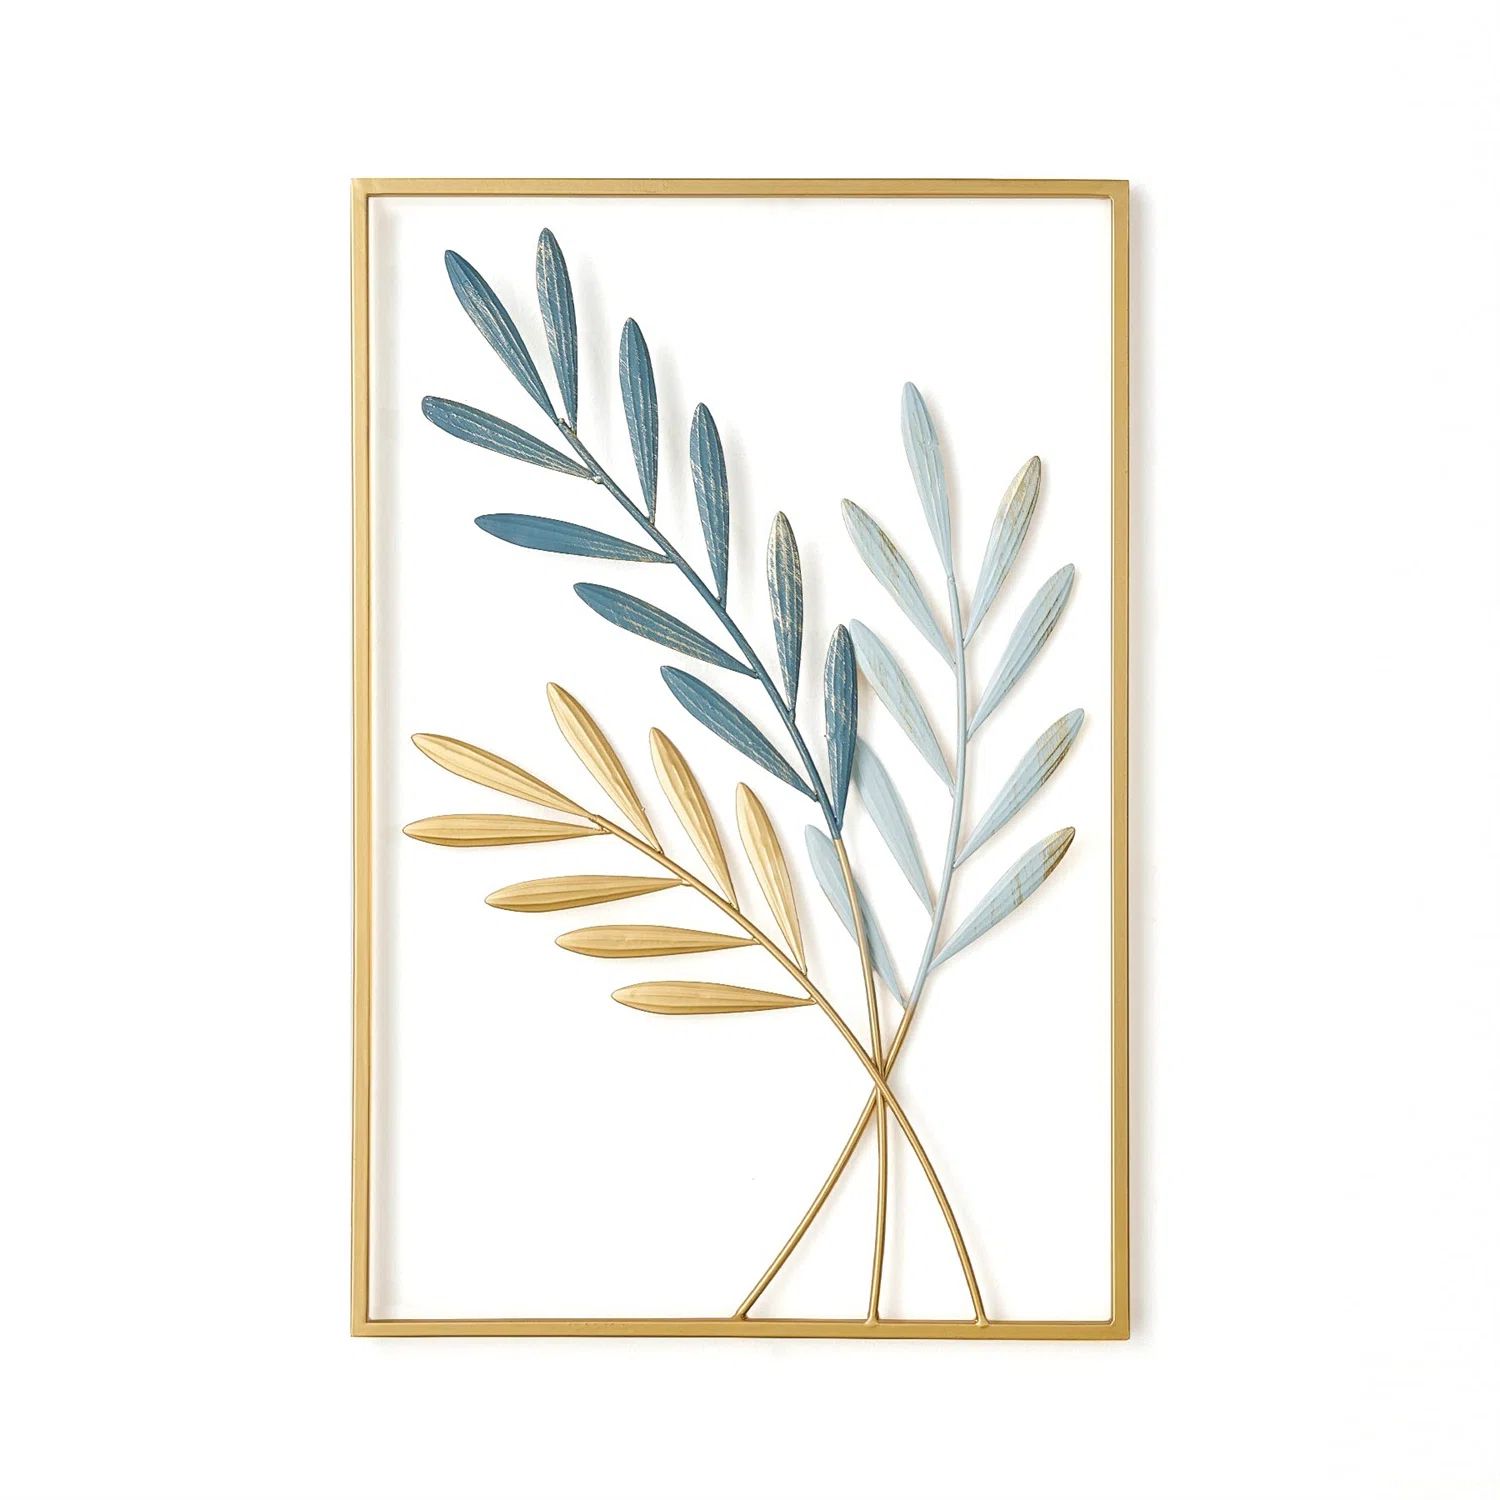 Gold Metal Wall Decor, Blue & Gold Leaf Art Wall Hanging Home Decor With Frame, Wall Decoration S... | Wayfair North America